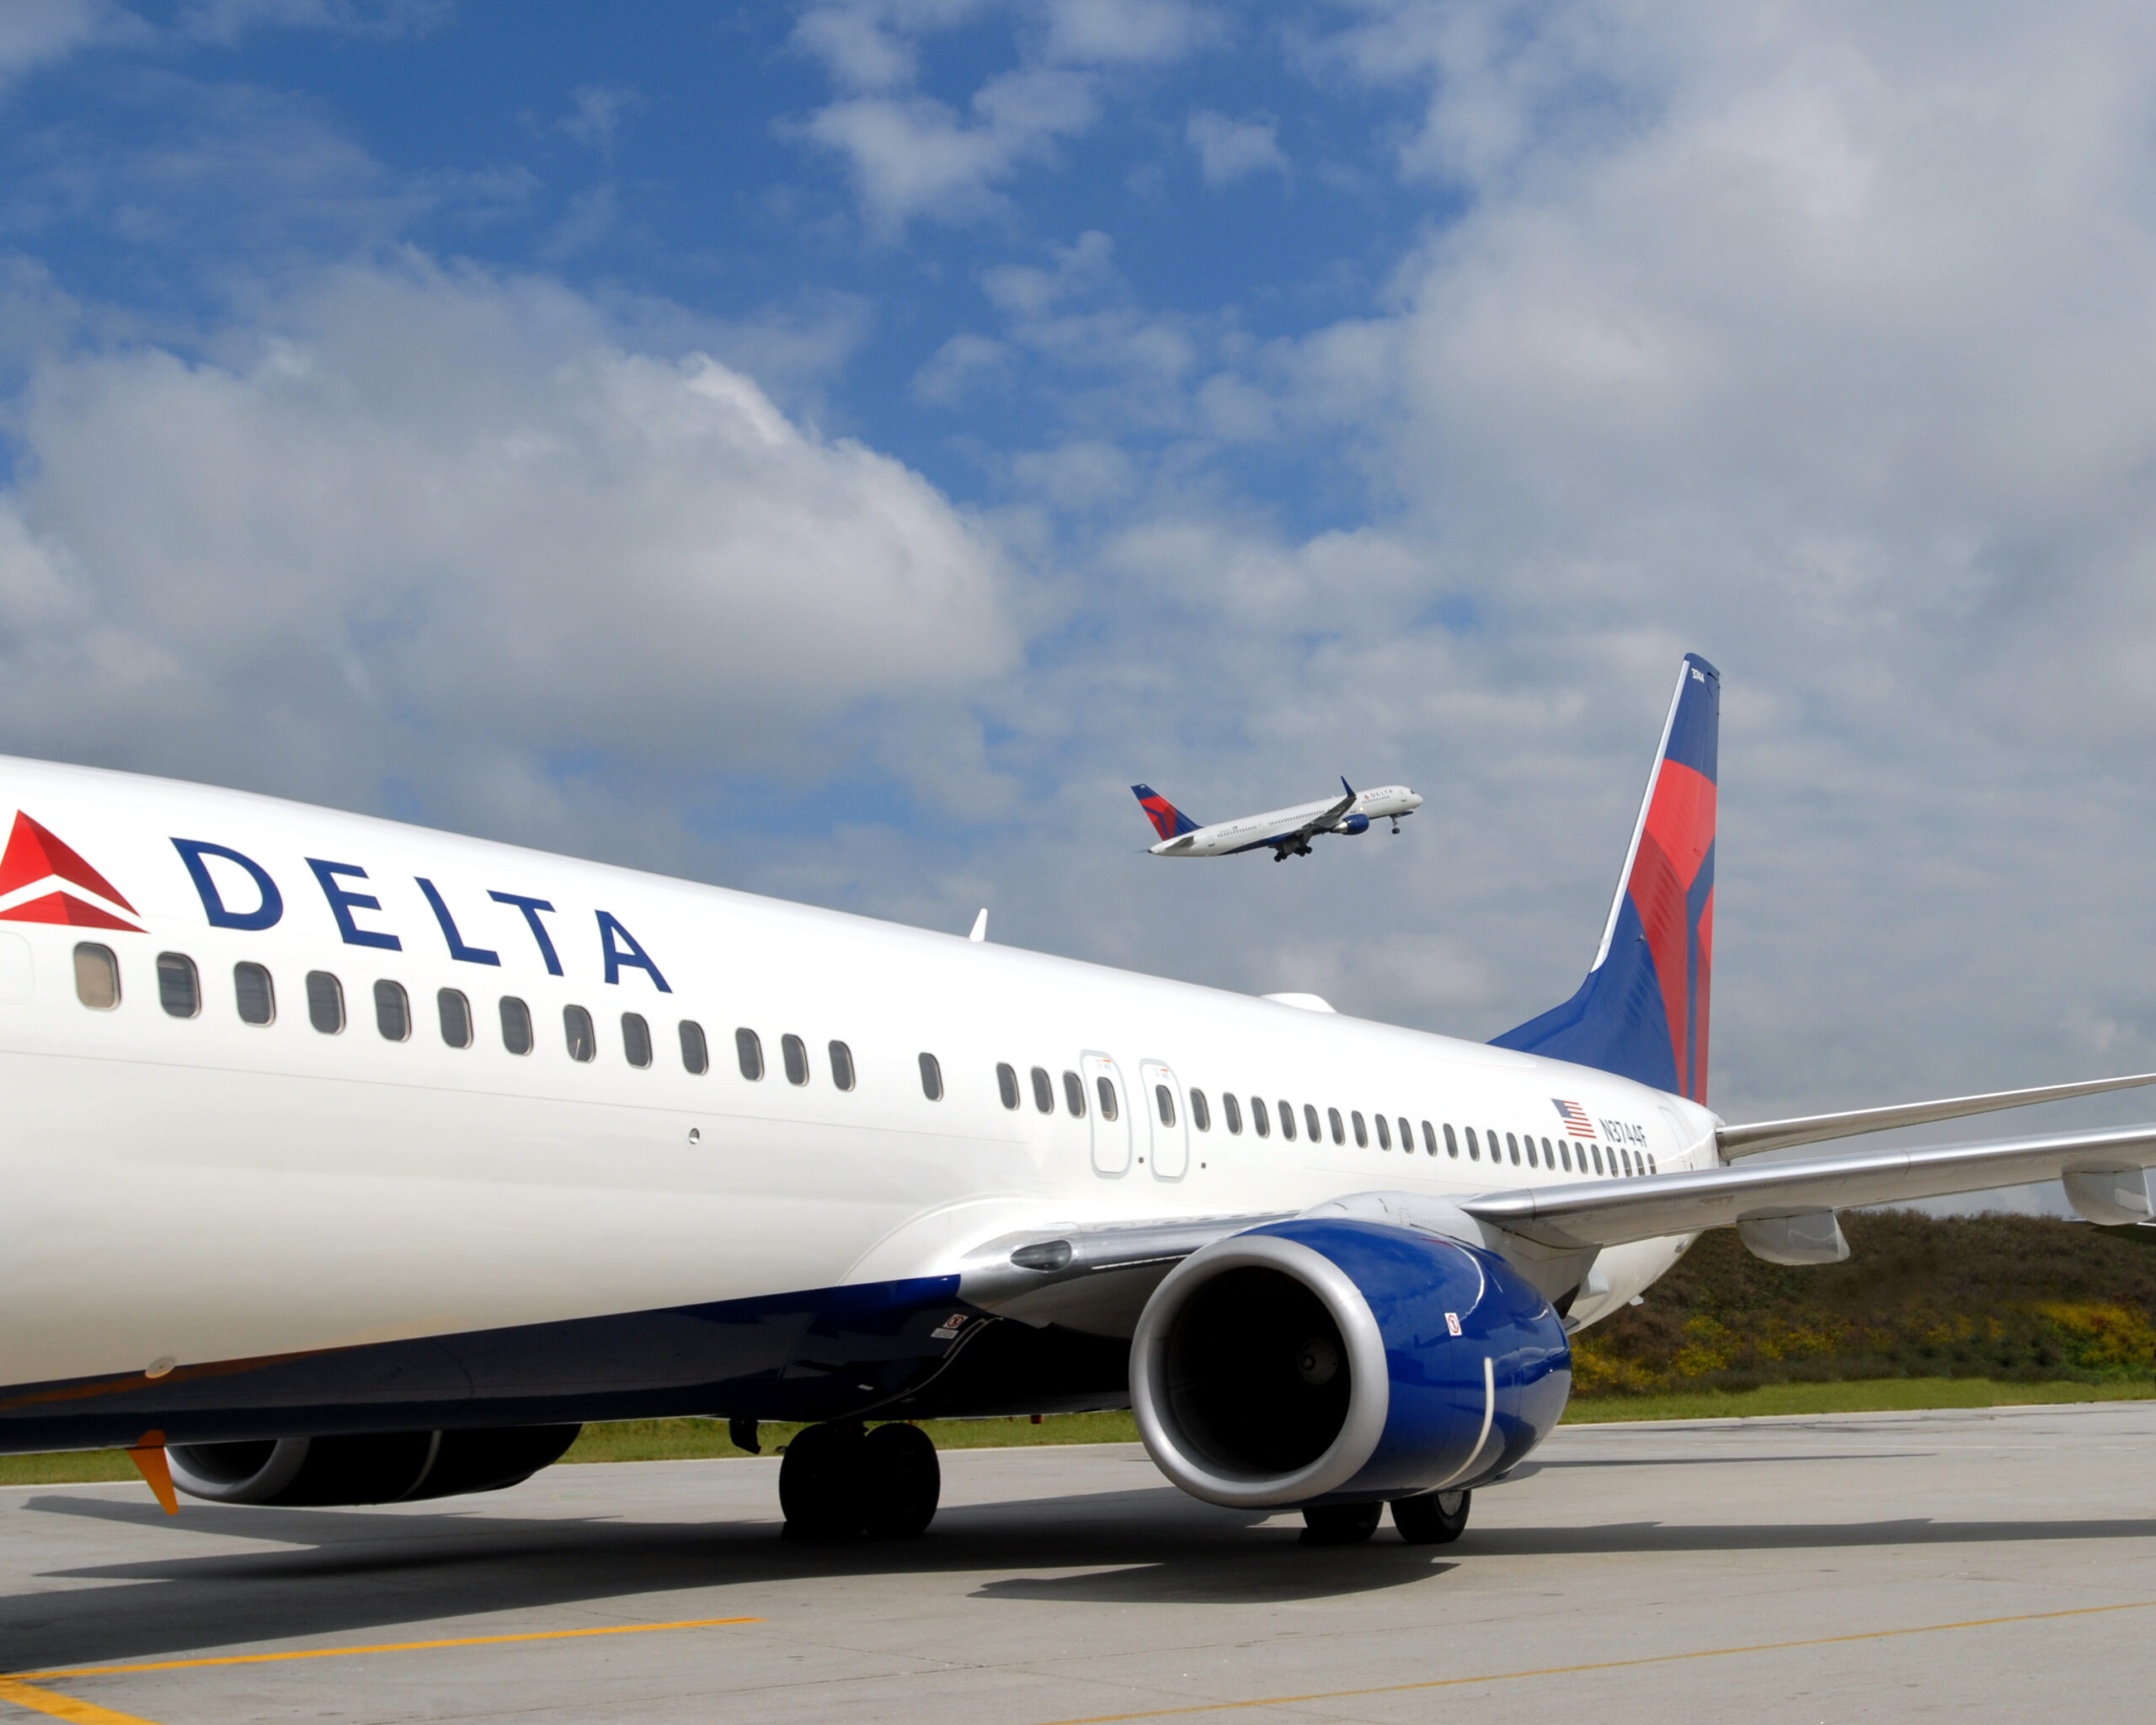 Delta Air Lines Keeps Climbing with New Major Route